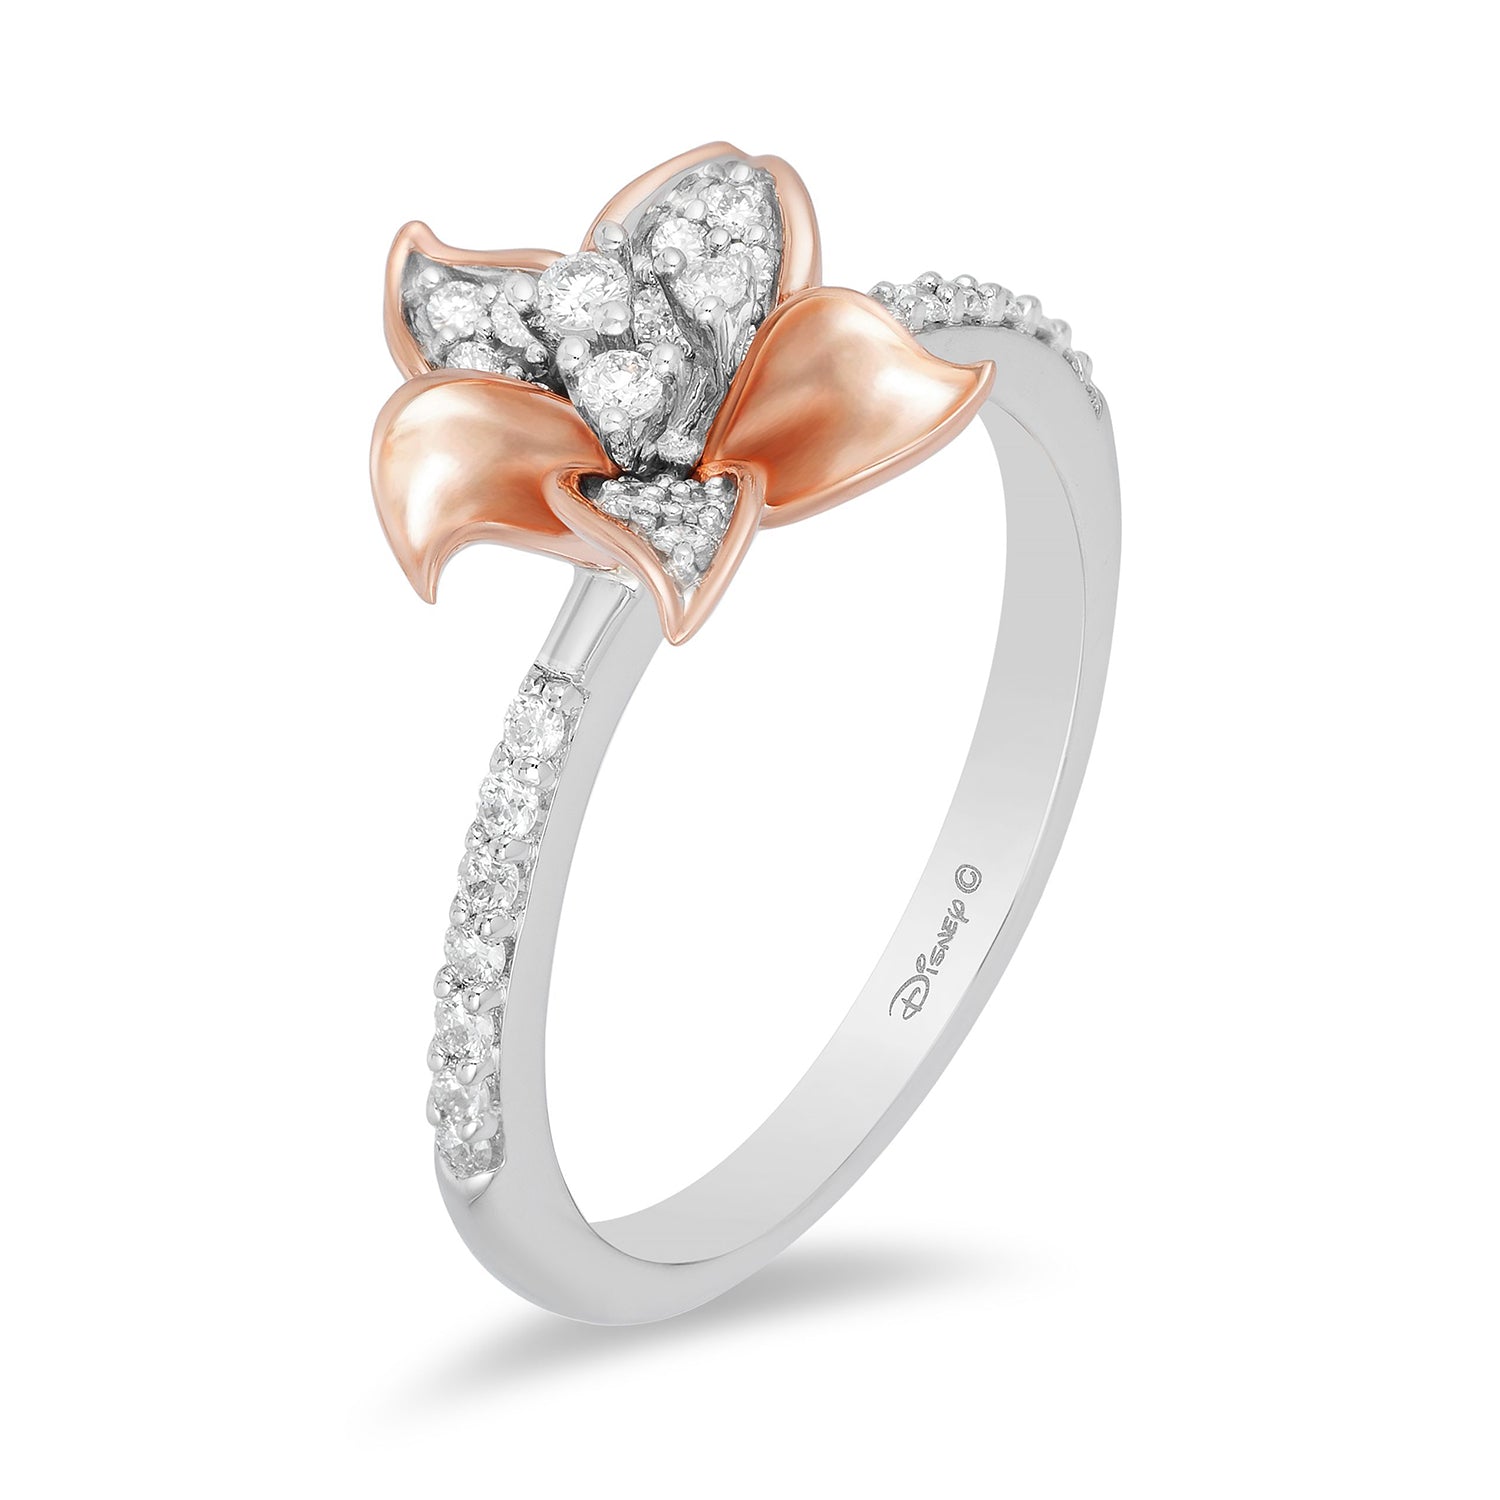 Disney Rapunzel Inspired Diamond Magical Flower Ring in 10K Sterling Silver & Rose Gold 1/10 Cttw | Enchanted Disney Fine Jewelry 5